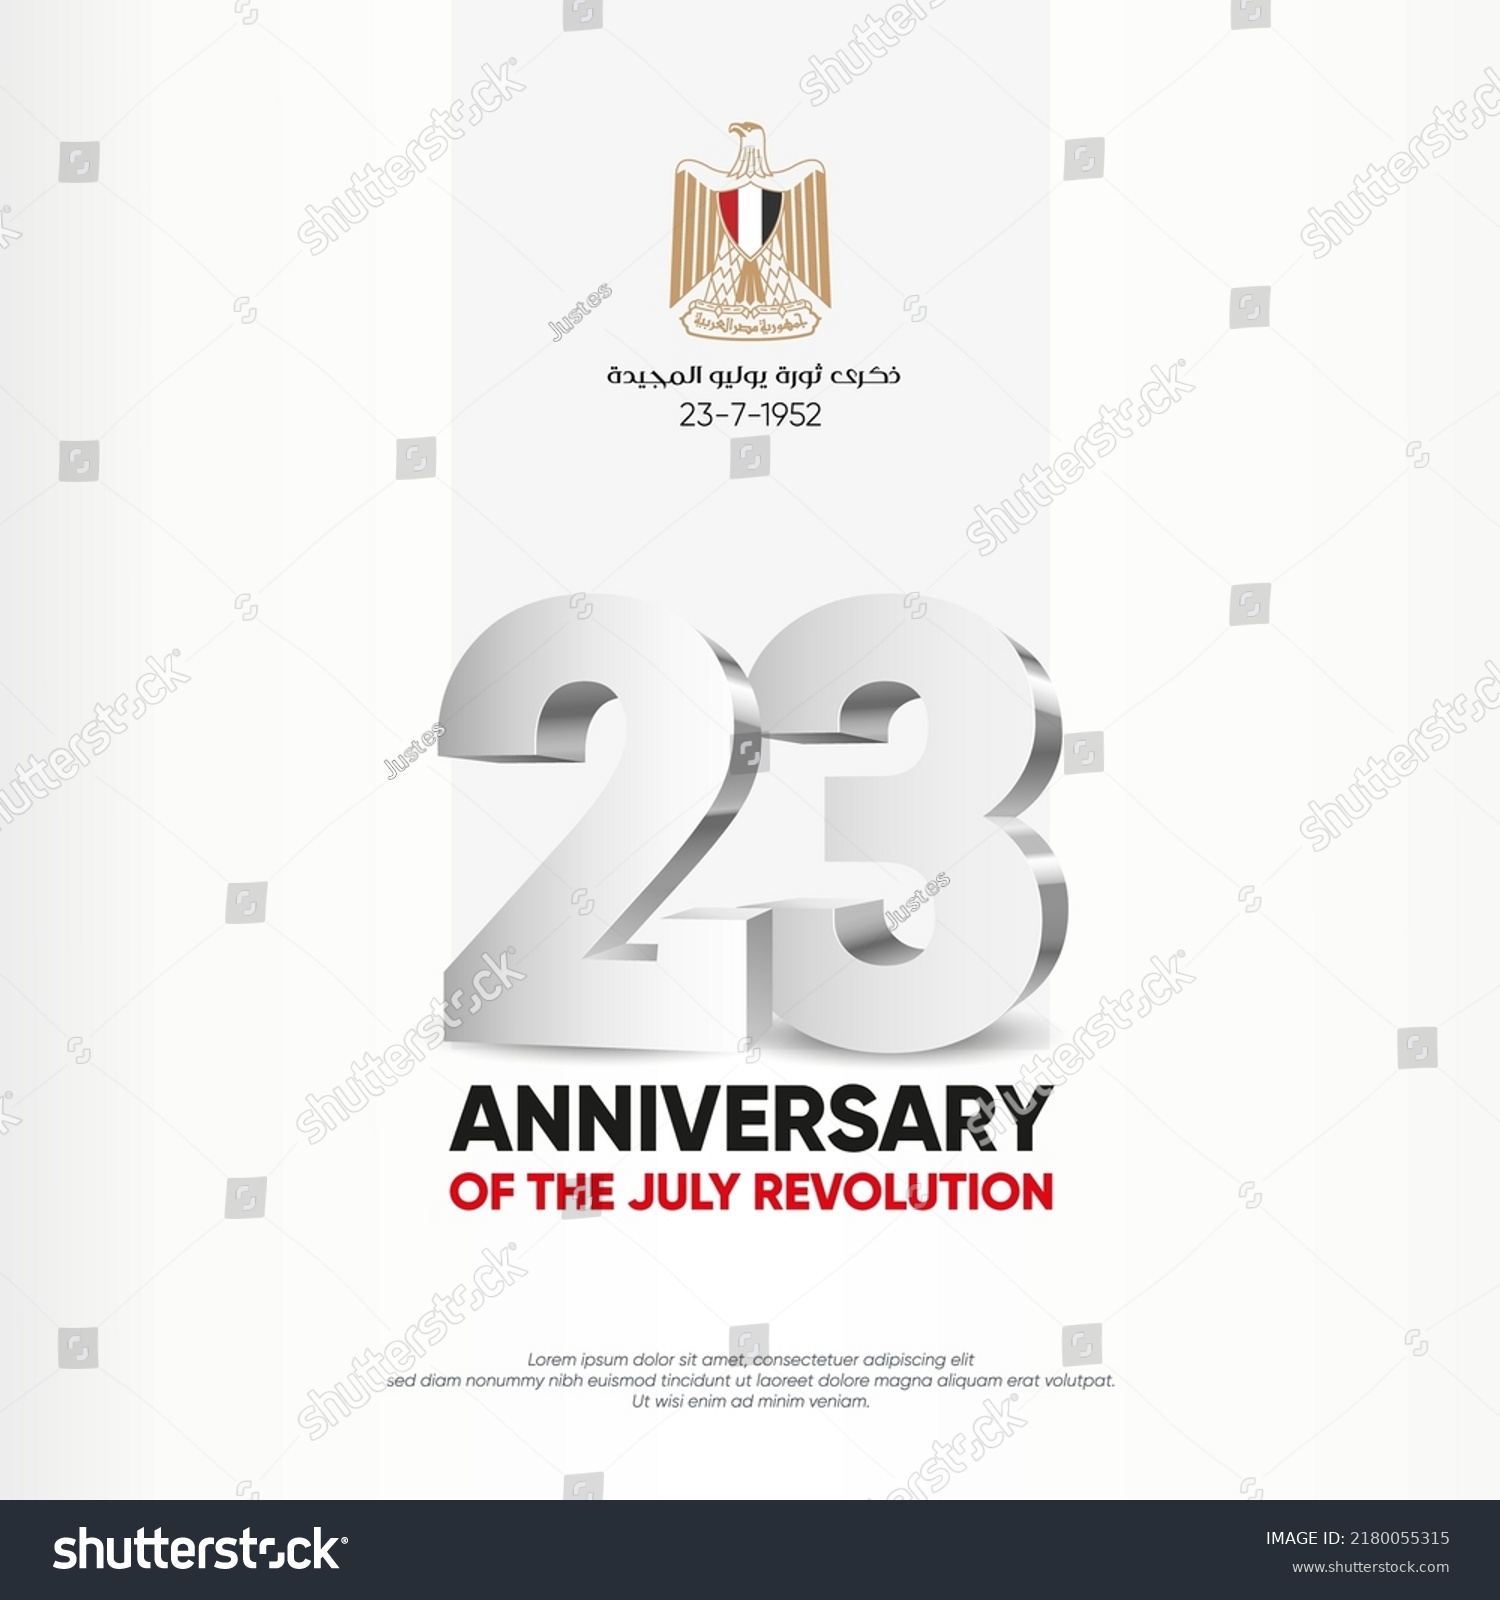 SVG of The Egyptian revolution of July 23, 1952 - calligraphy Translation (July Revolution). Greeting Card with 23 number 3d, and Egypt flag svg